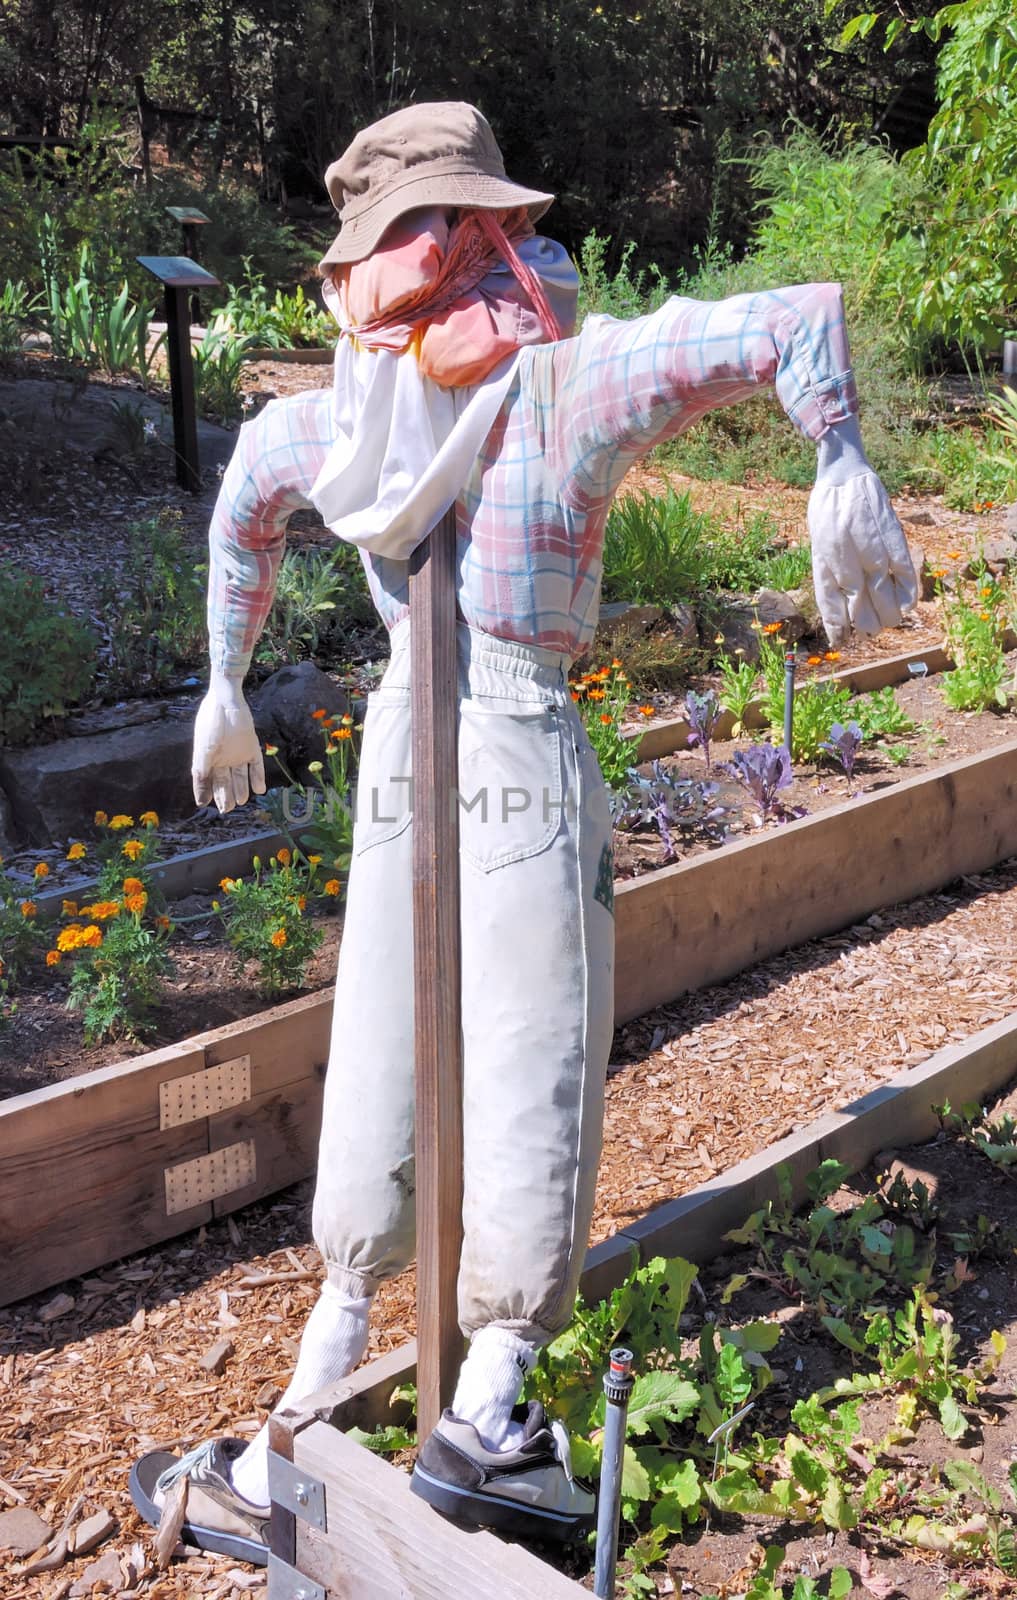 Scarecrow in a Garden Shown from Behind